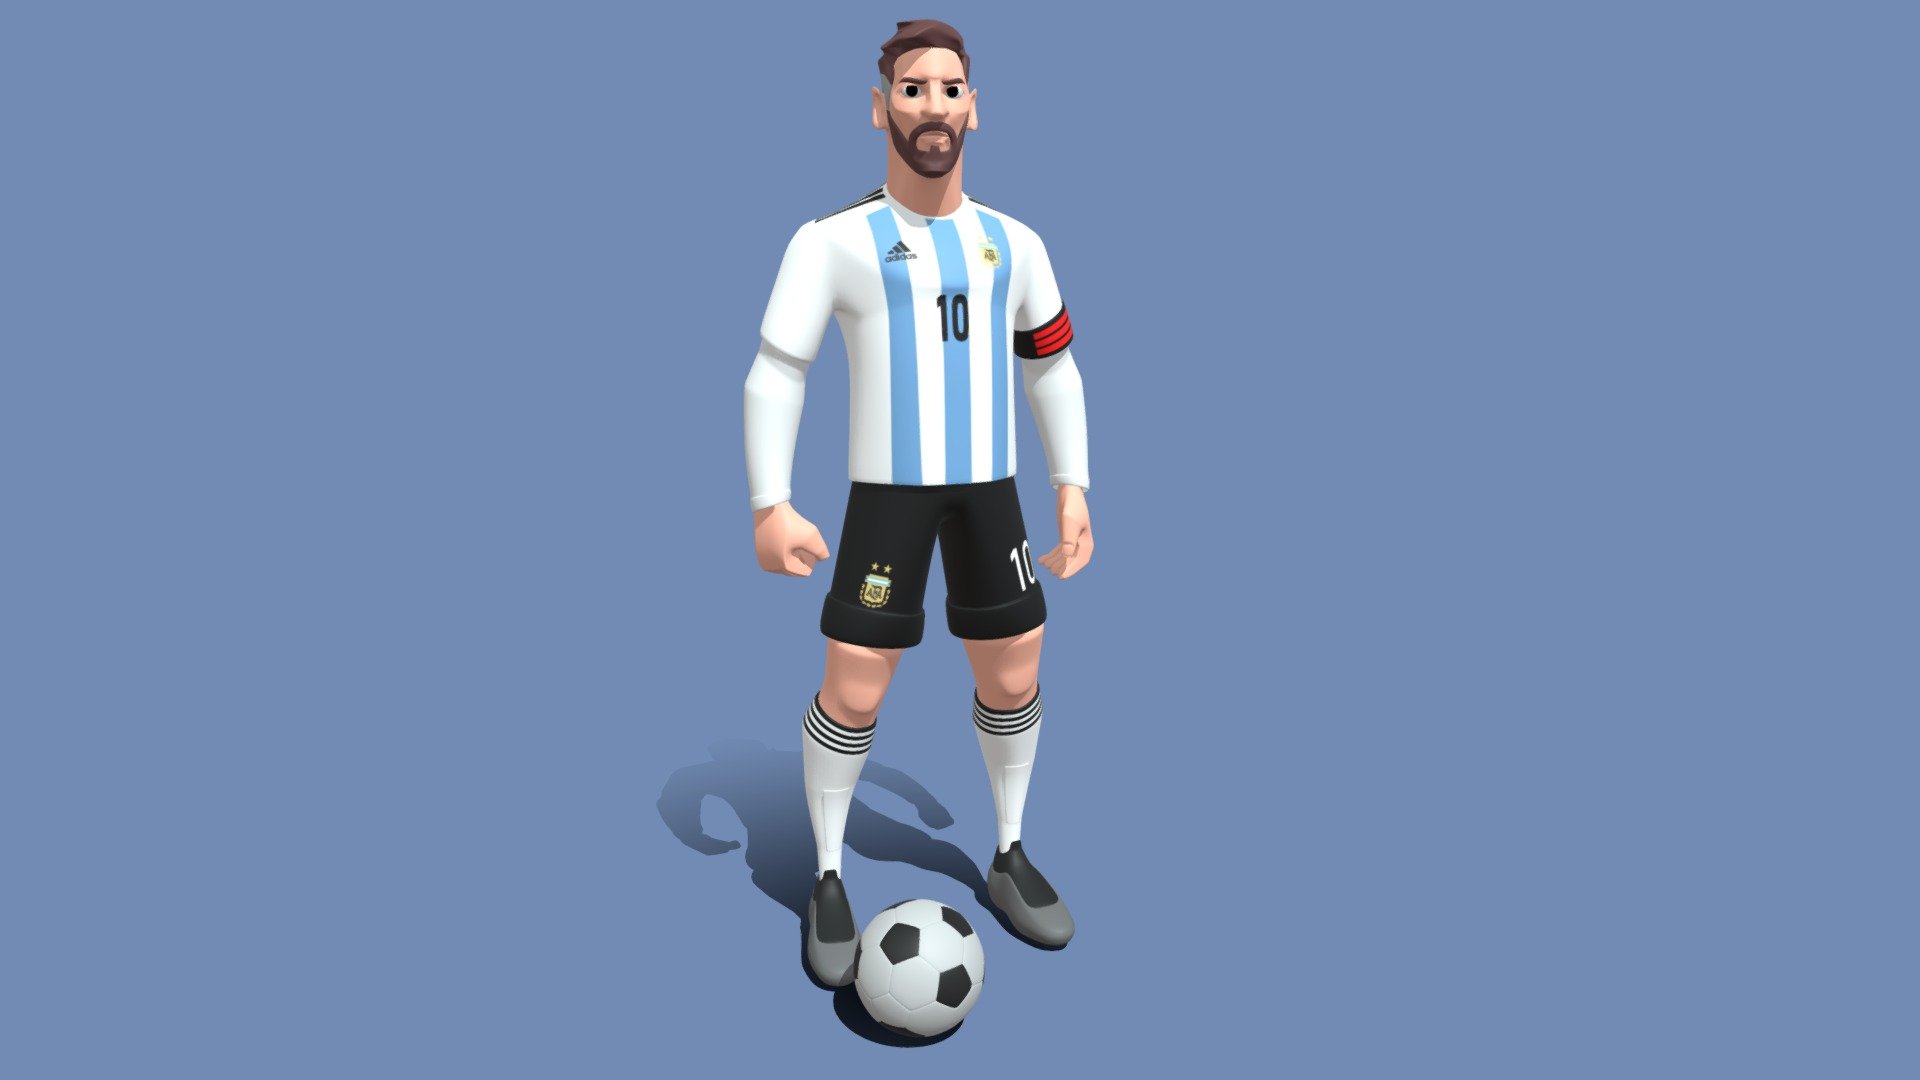 HELLO EVERYONE,
THIS IS 3D LEO MESSI CARTOON CHARACTER CONCPET ART,
MODELED IN AUTODESK MAYA 3D AND TEXTURED IN ADOBE SUBSTANCE PAINTER AND ADOBE PHOTOSHOP 3d model